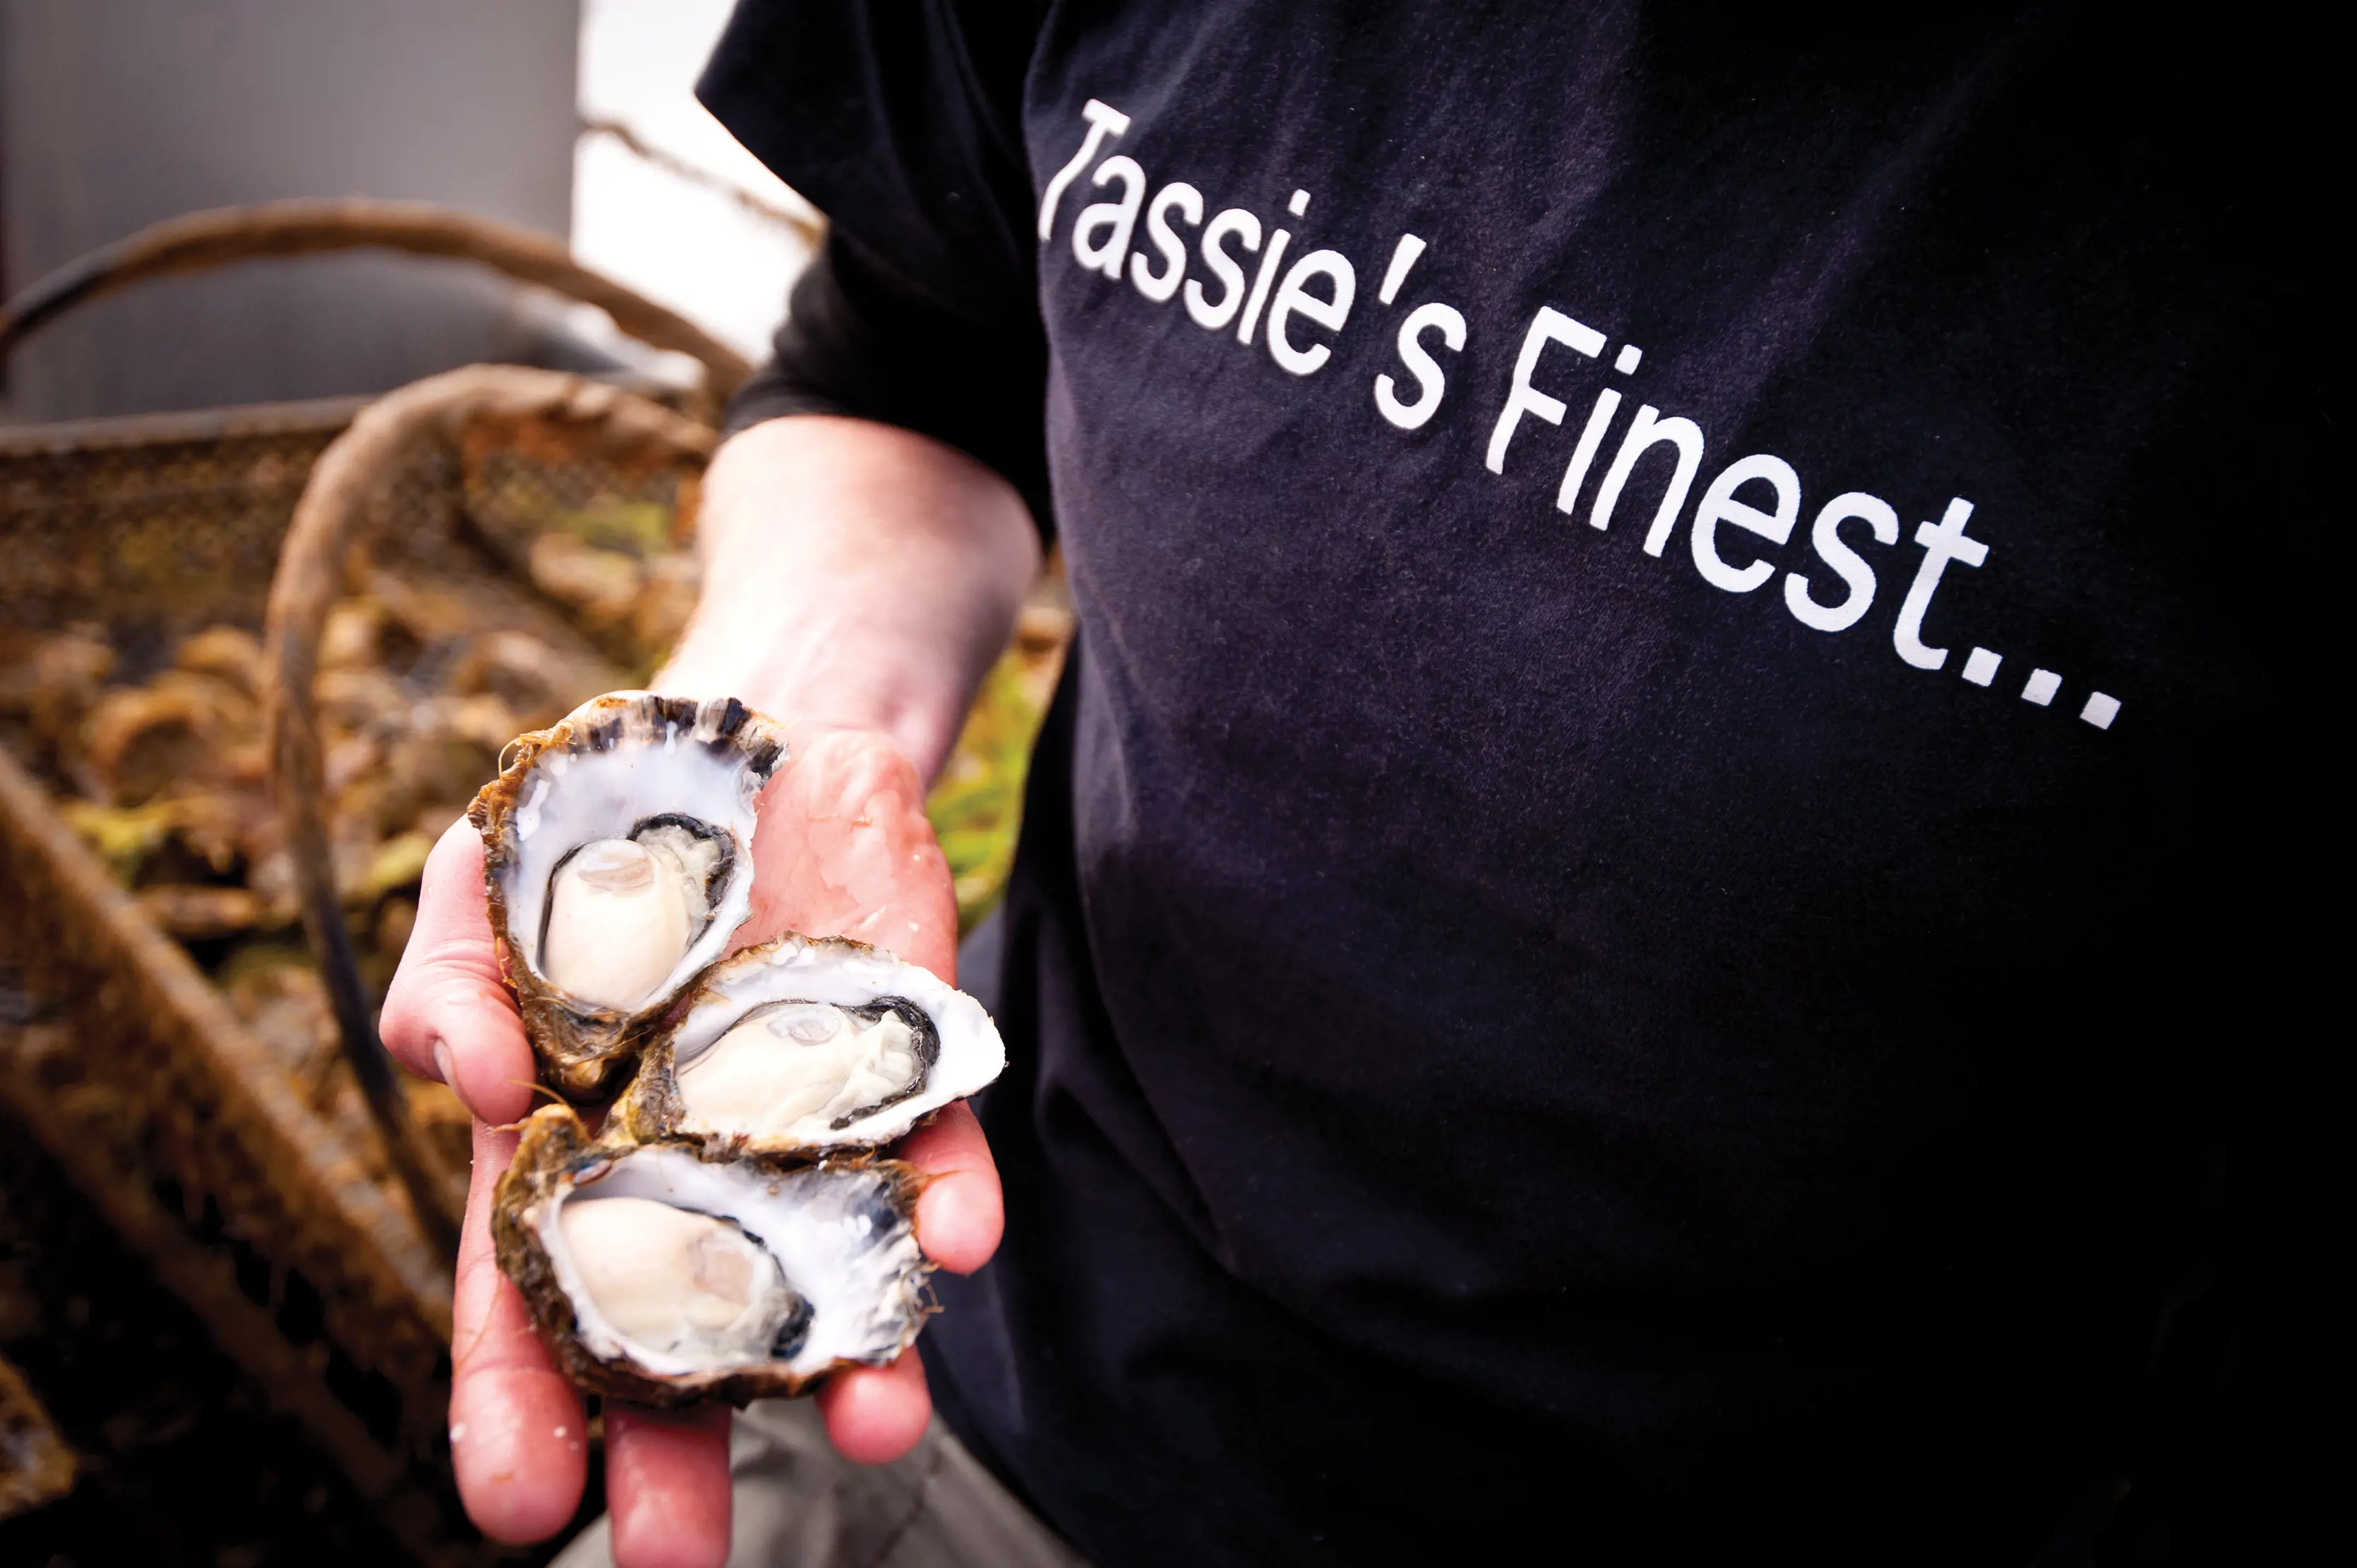 Get Shucked - Bruny Island Oysters